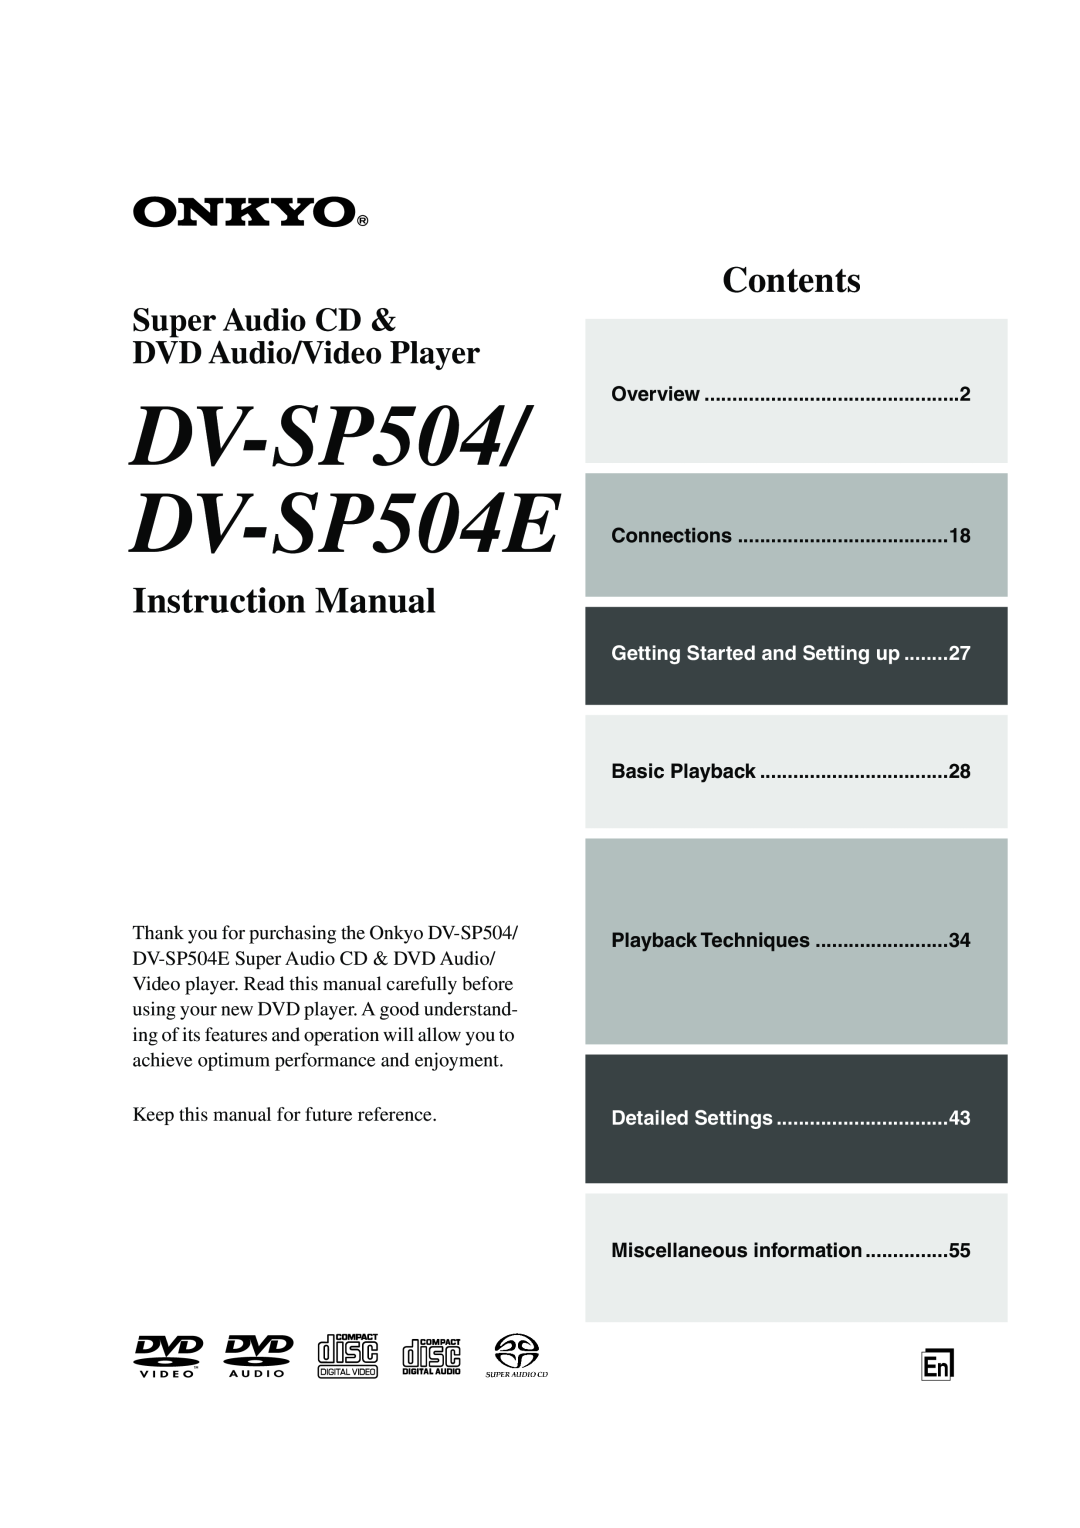 Onkyo DV-SP504E instruction manual Connections, Keep this manual for future reference, Overview, Playback Techniques 